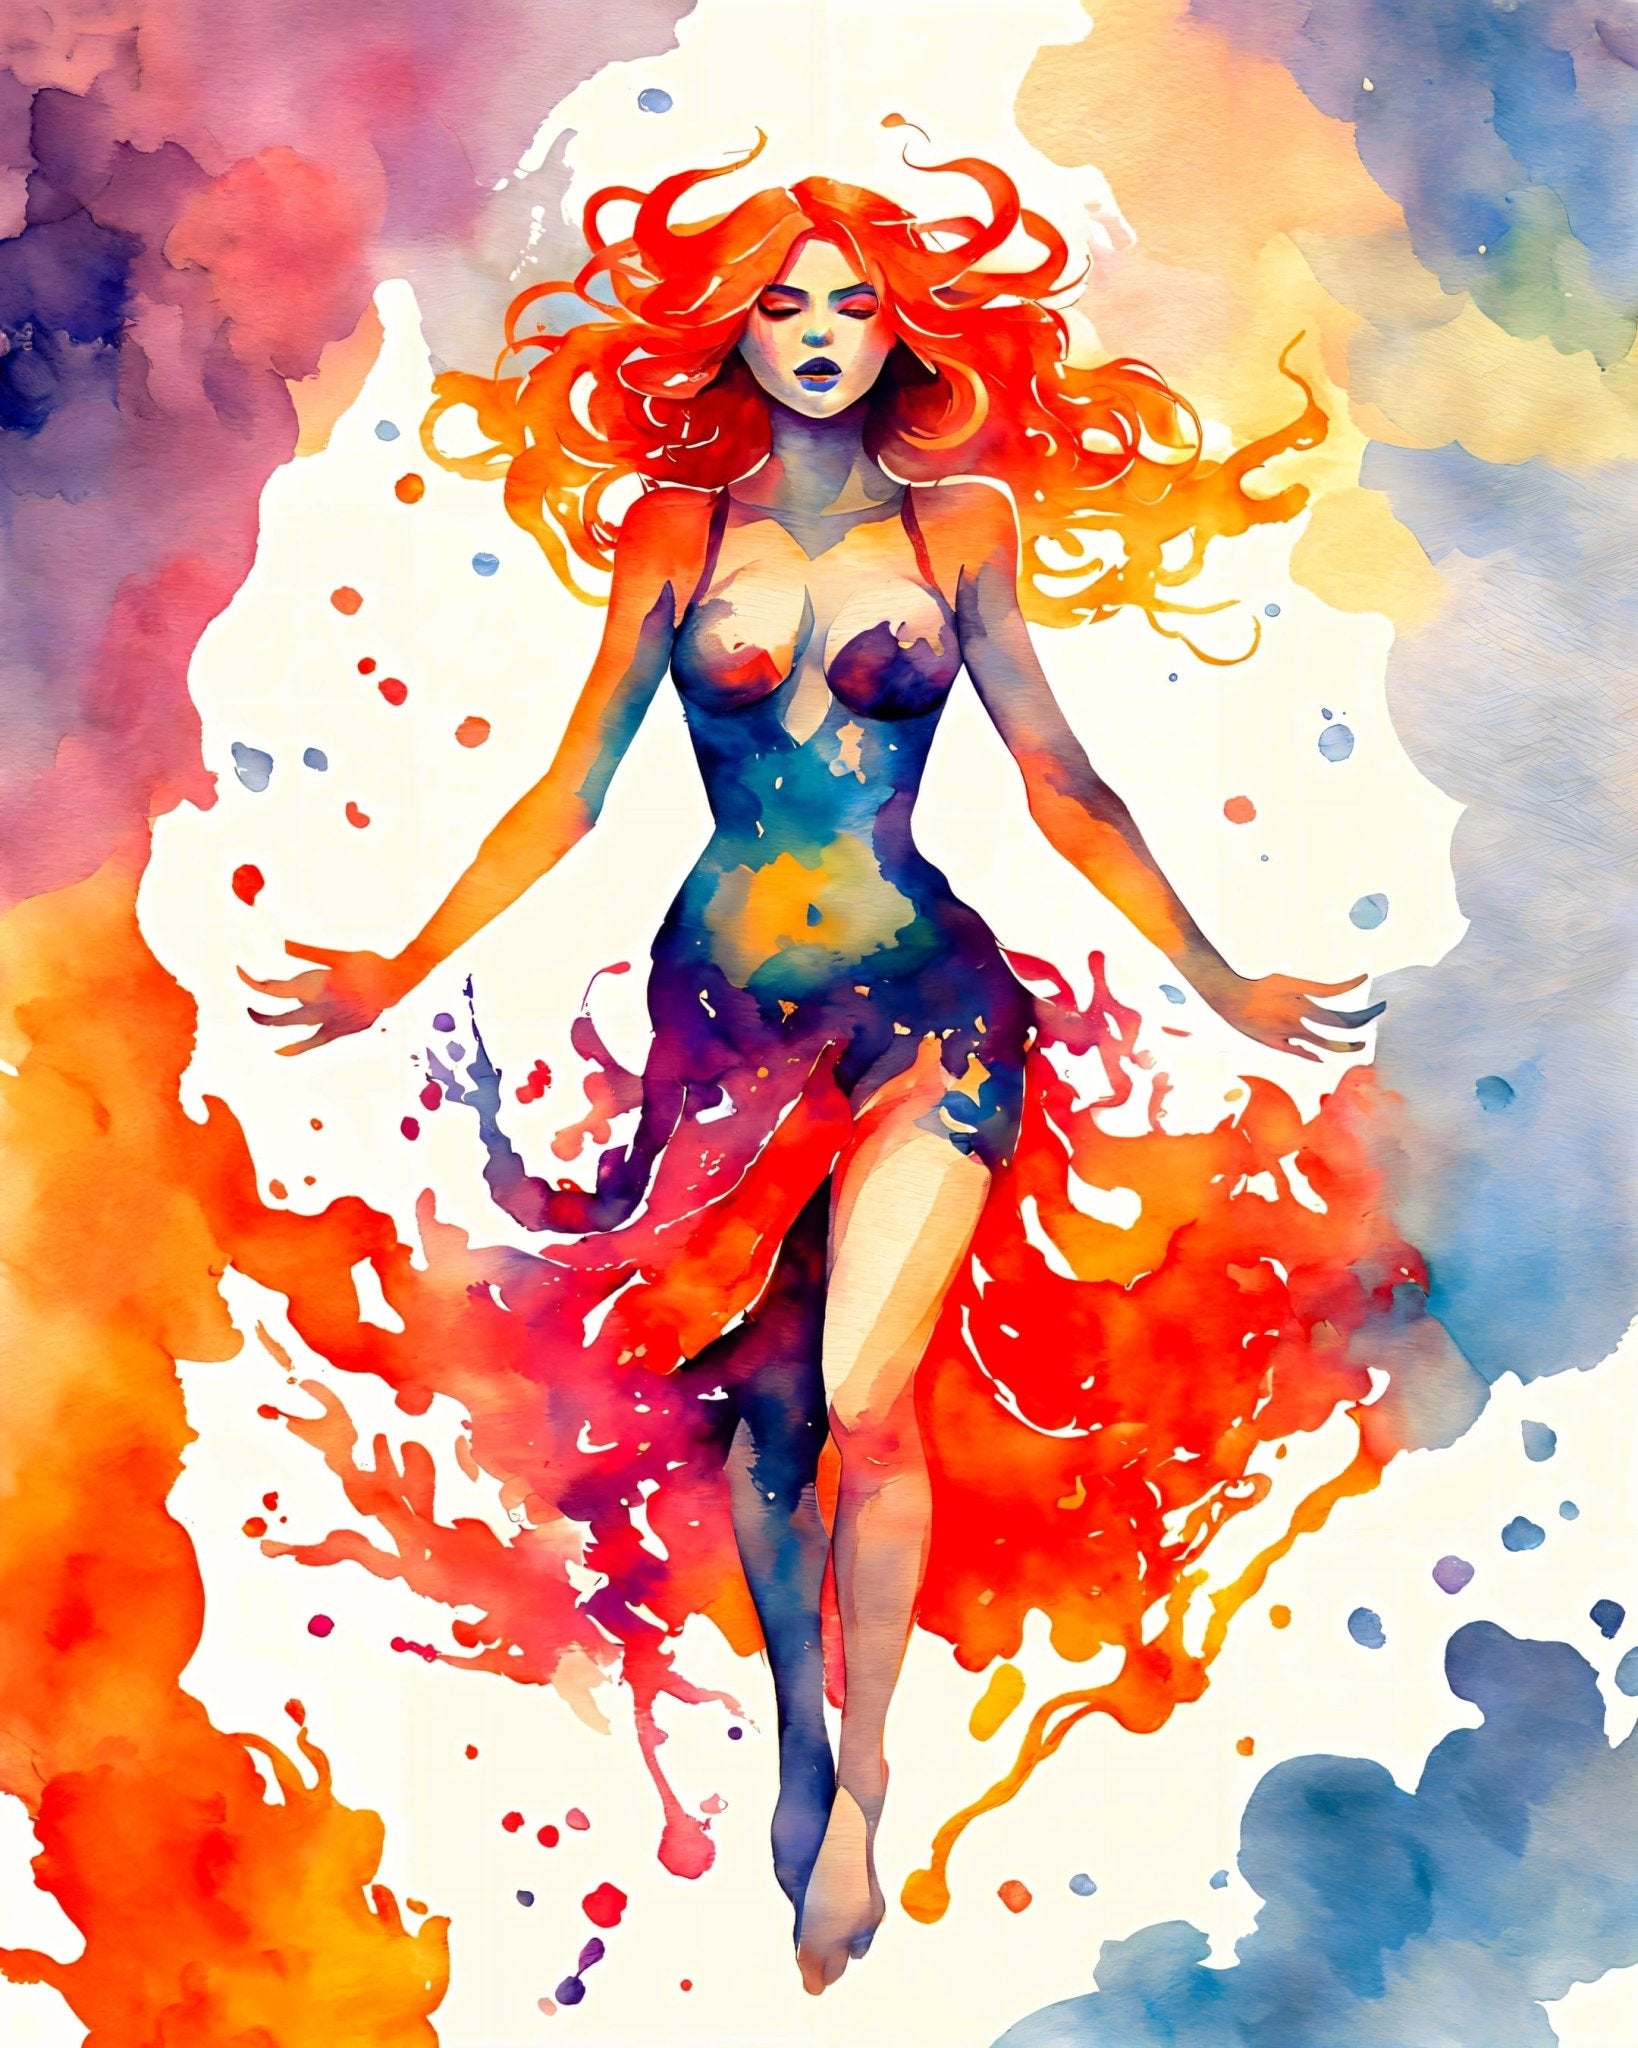 Fire witch - Poster - Ever colorful